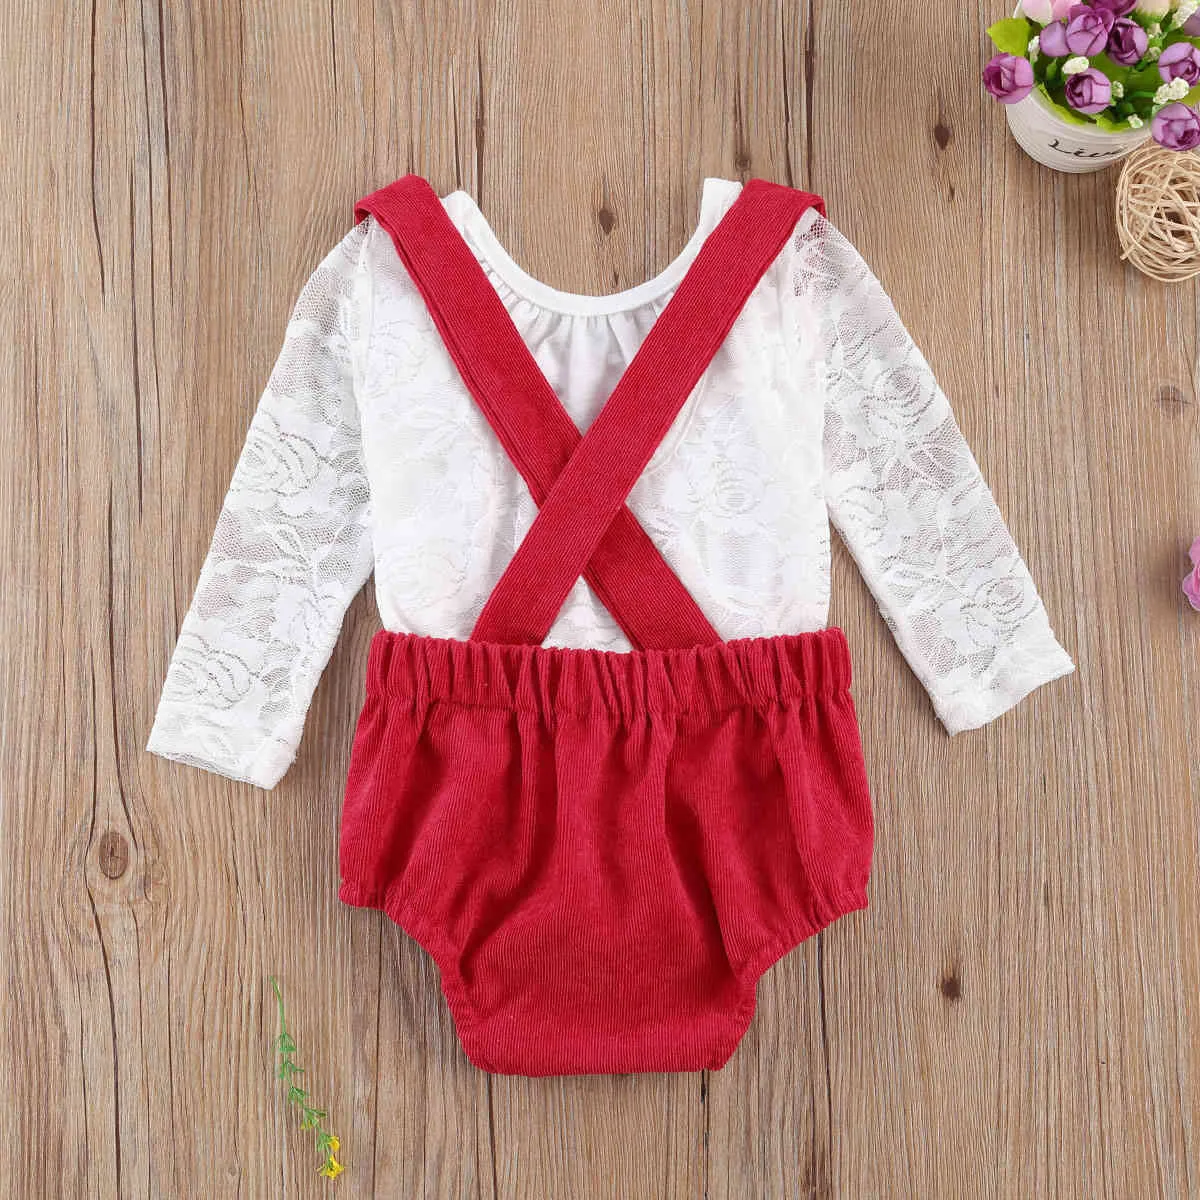 0-18m Christmas Infant Born Baby Girl Clothes Set White Lace Romper Rode Corduroy Algemene Outfits Herfst Baby Kleding 210515